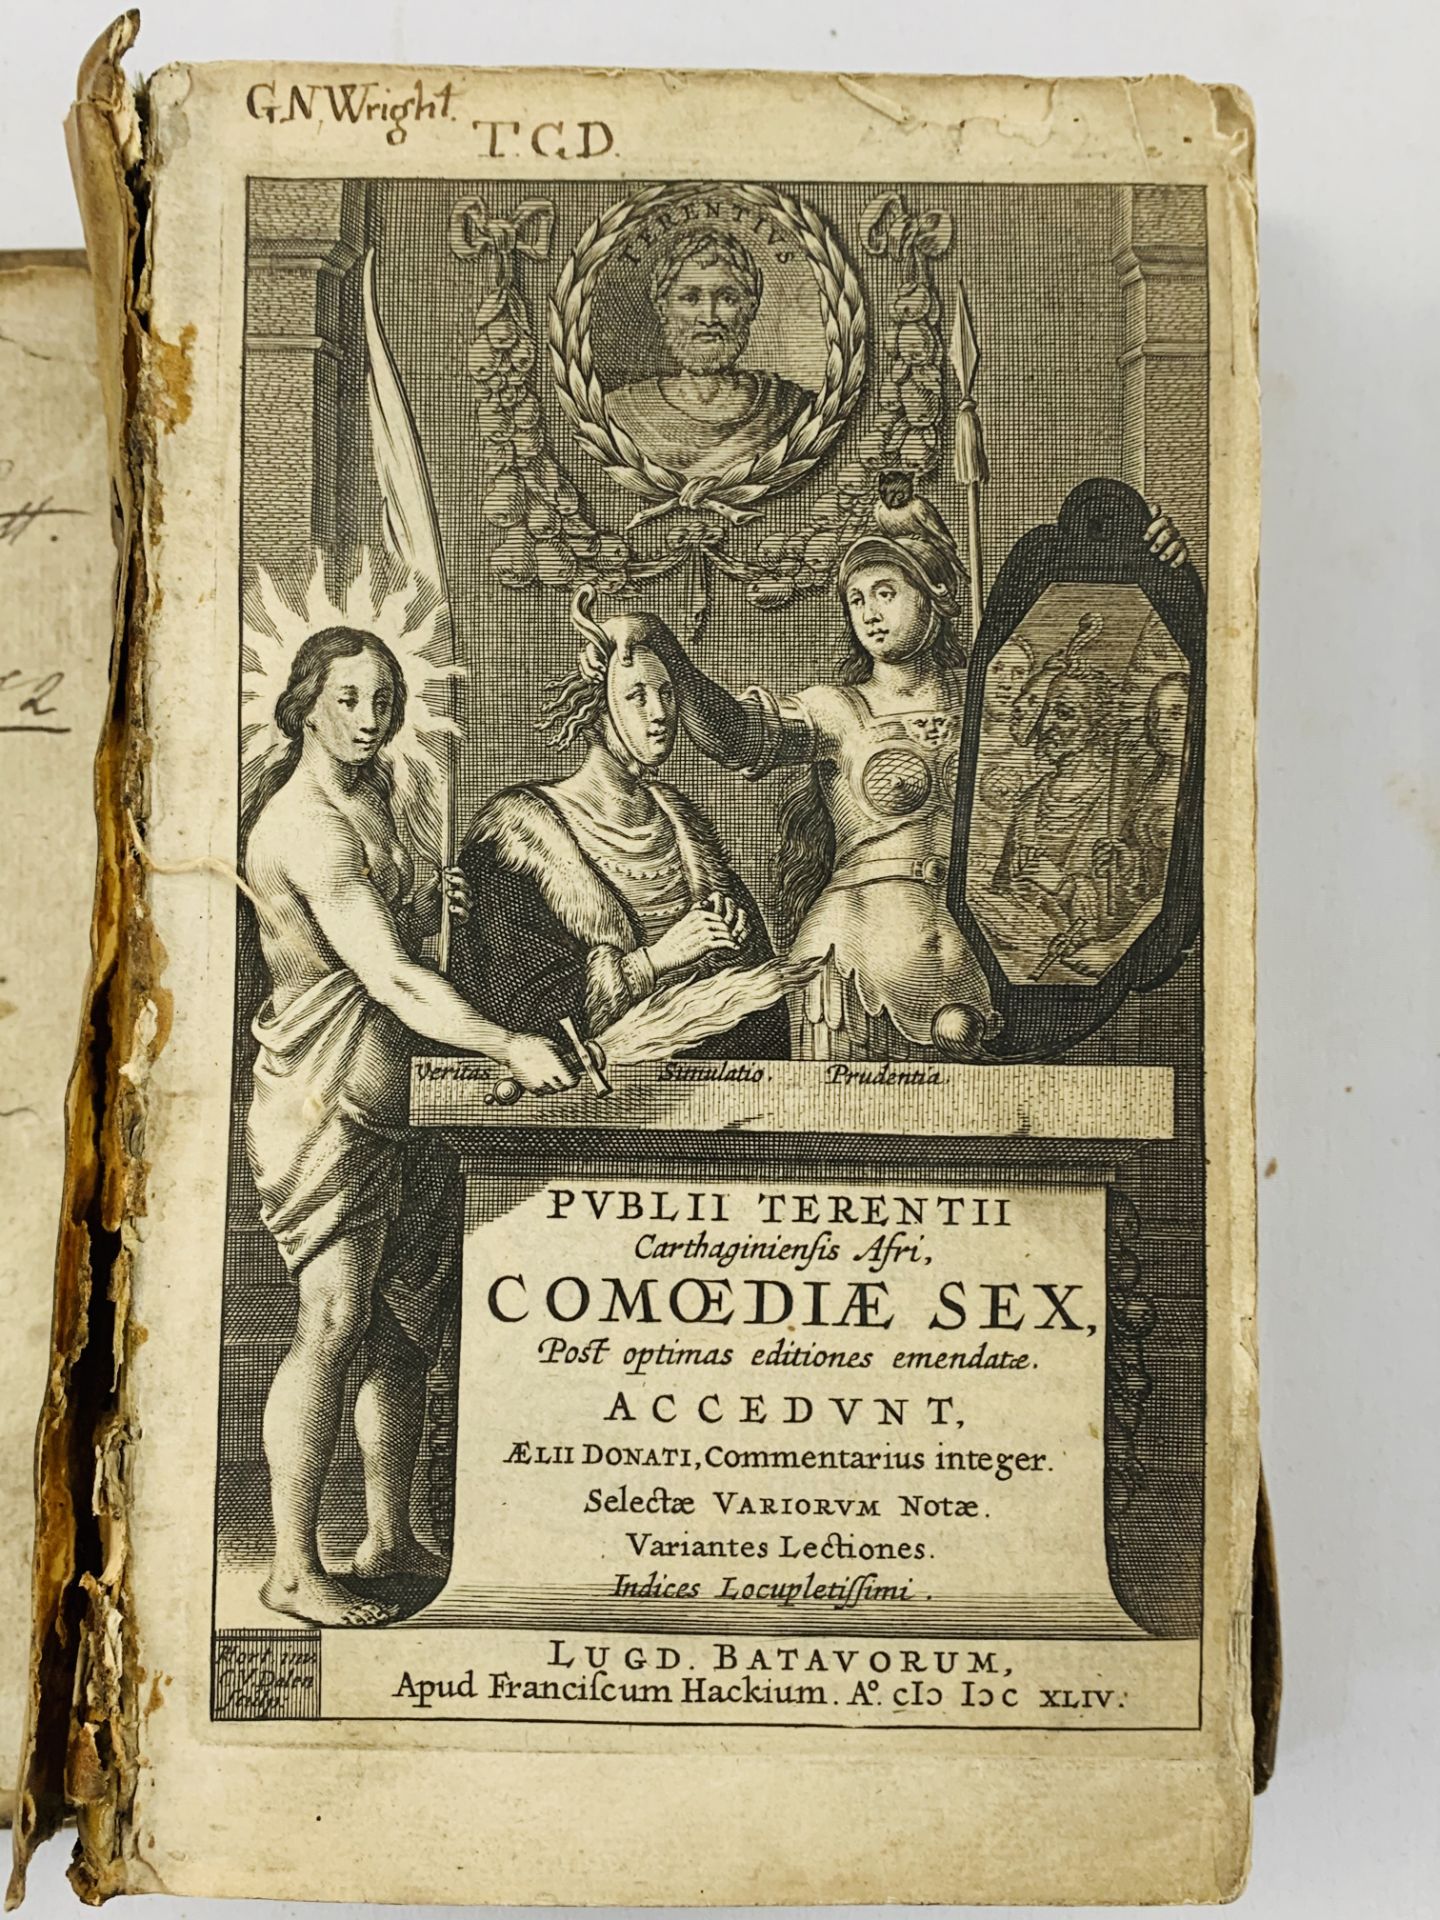 Terence's Comedies, Latin text, publ. Lugd. Batavorum, 1644. - Image 2 of 3